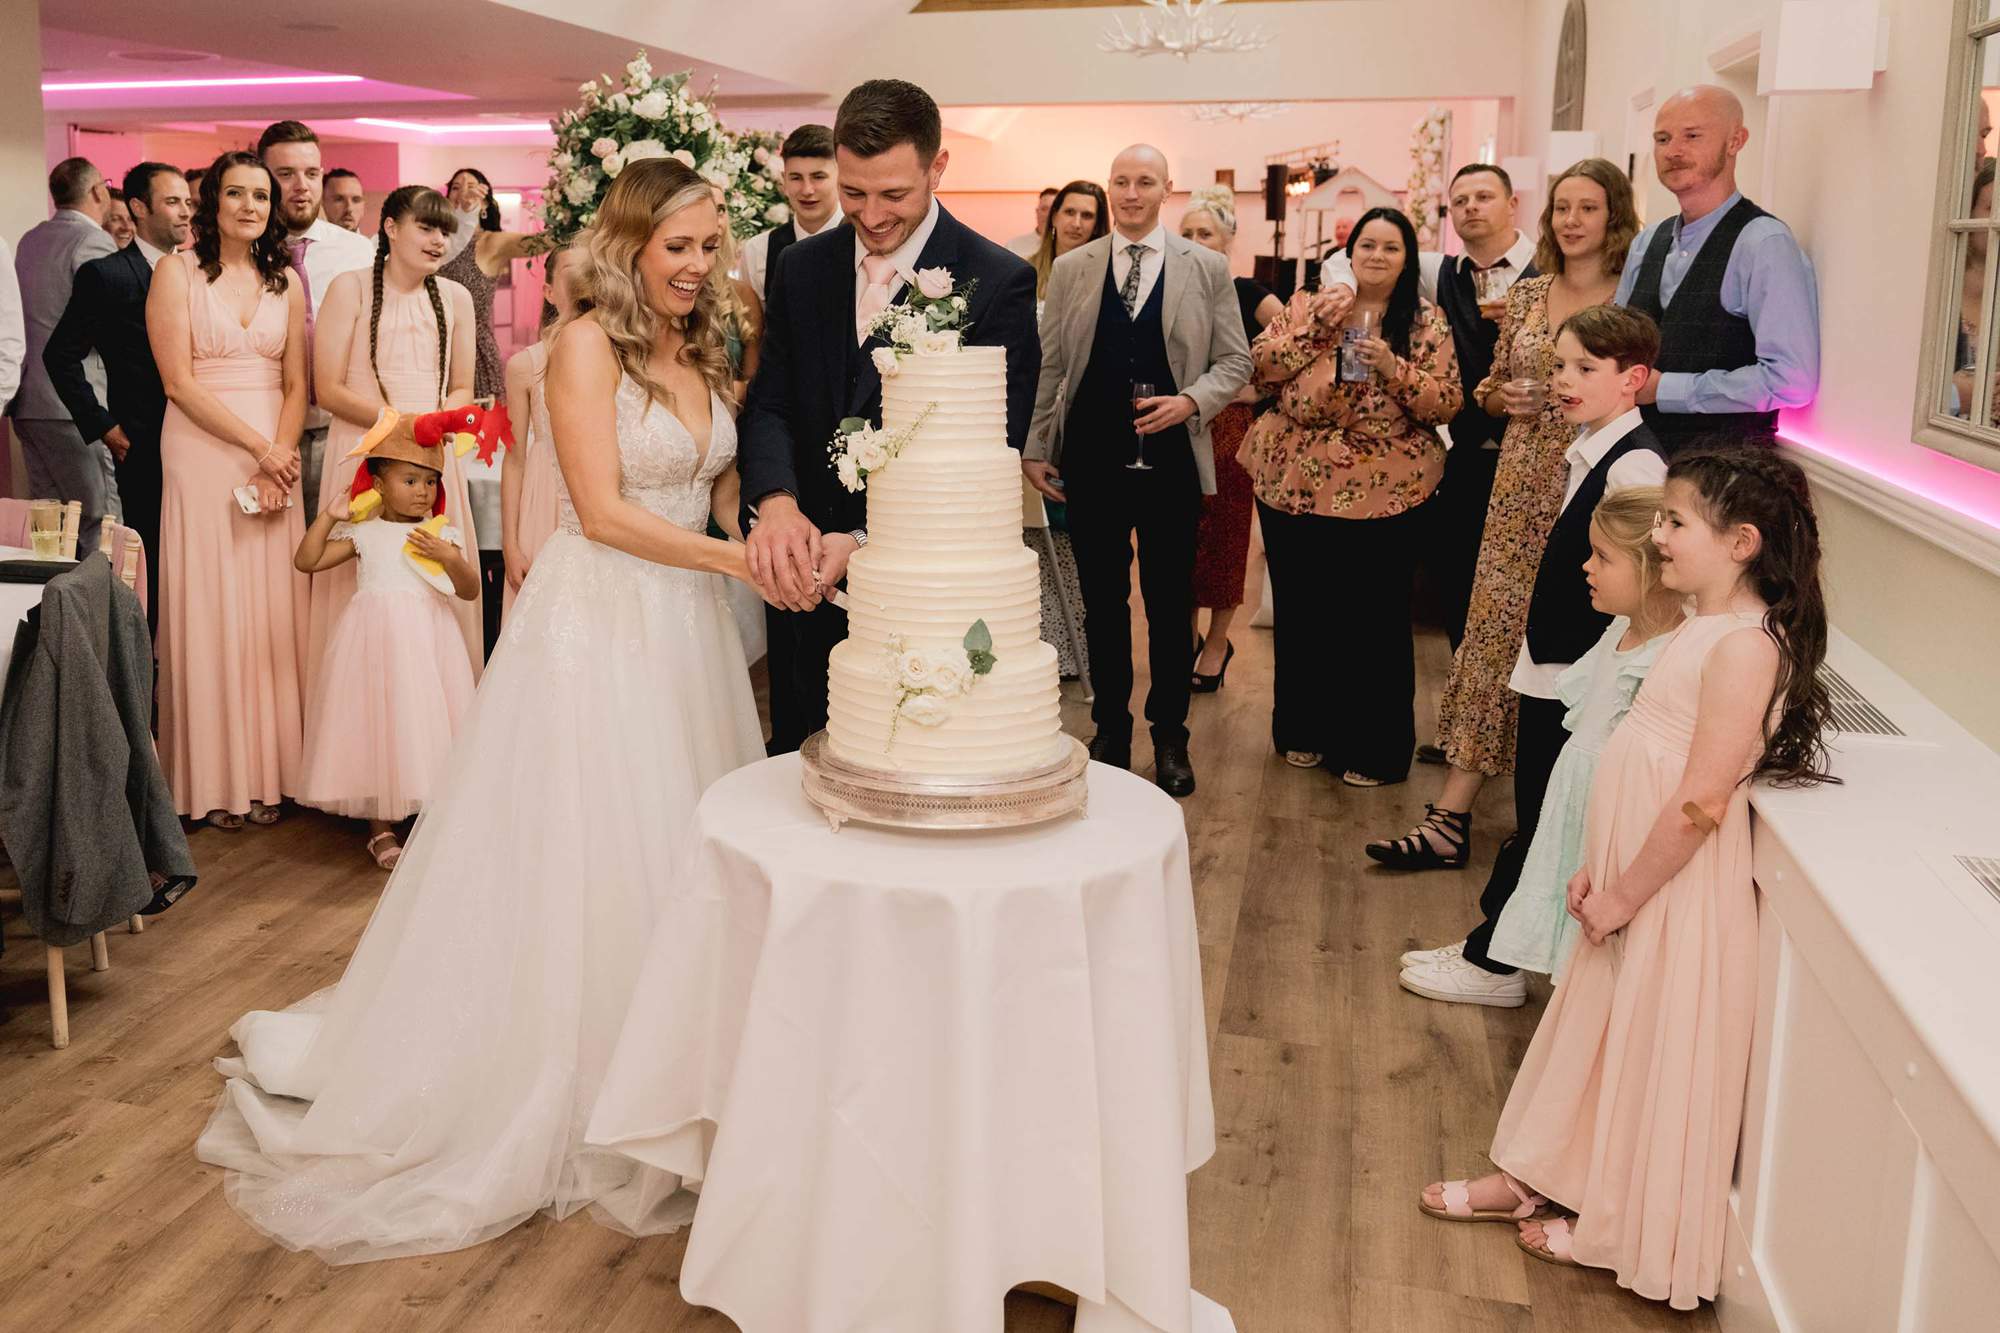 Bride and groom cut their wedding cake at Cottesmore Golf Club as their guests watch and cheer.